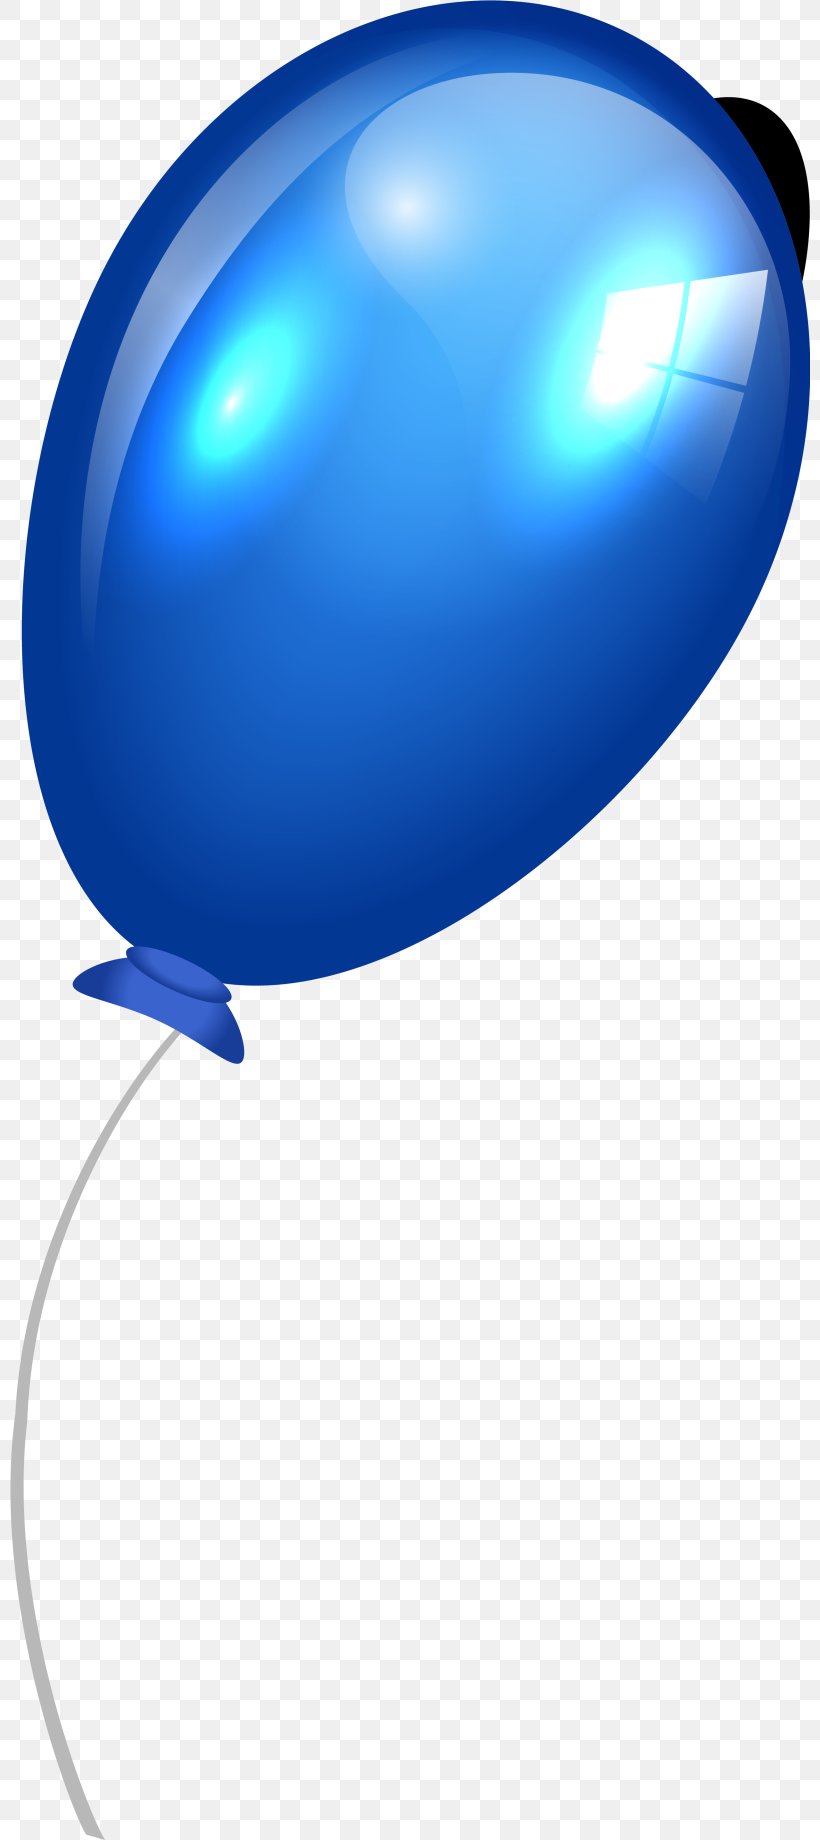 Blue Balloon Clip Art, PNG, 800x1840px, Blue, Animation, Balloon, Jpeg Network Graphics Download Free